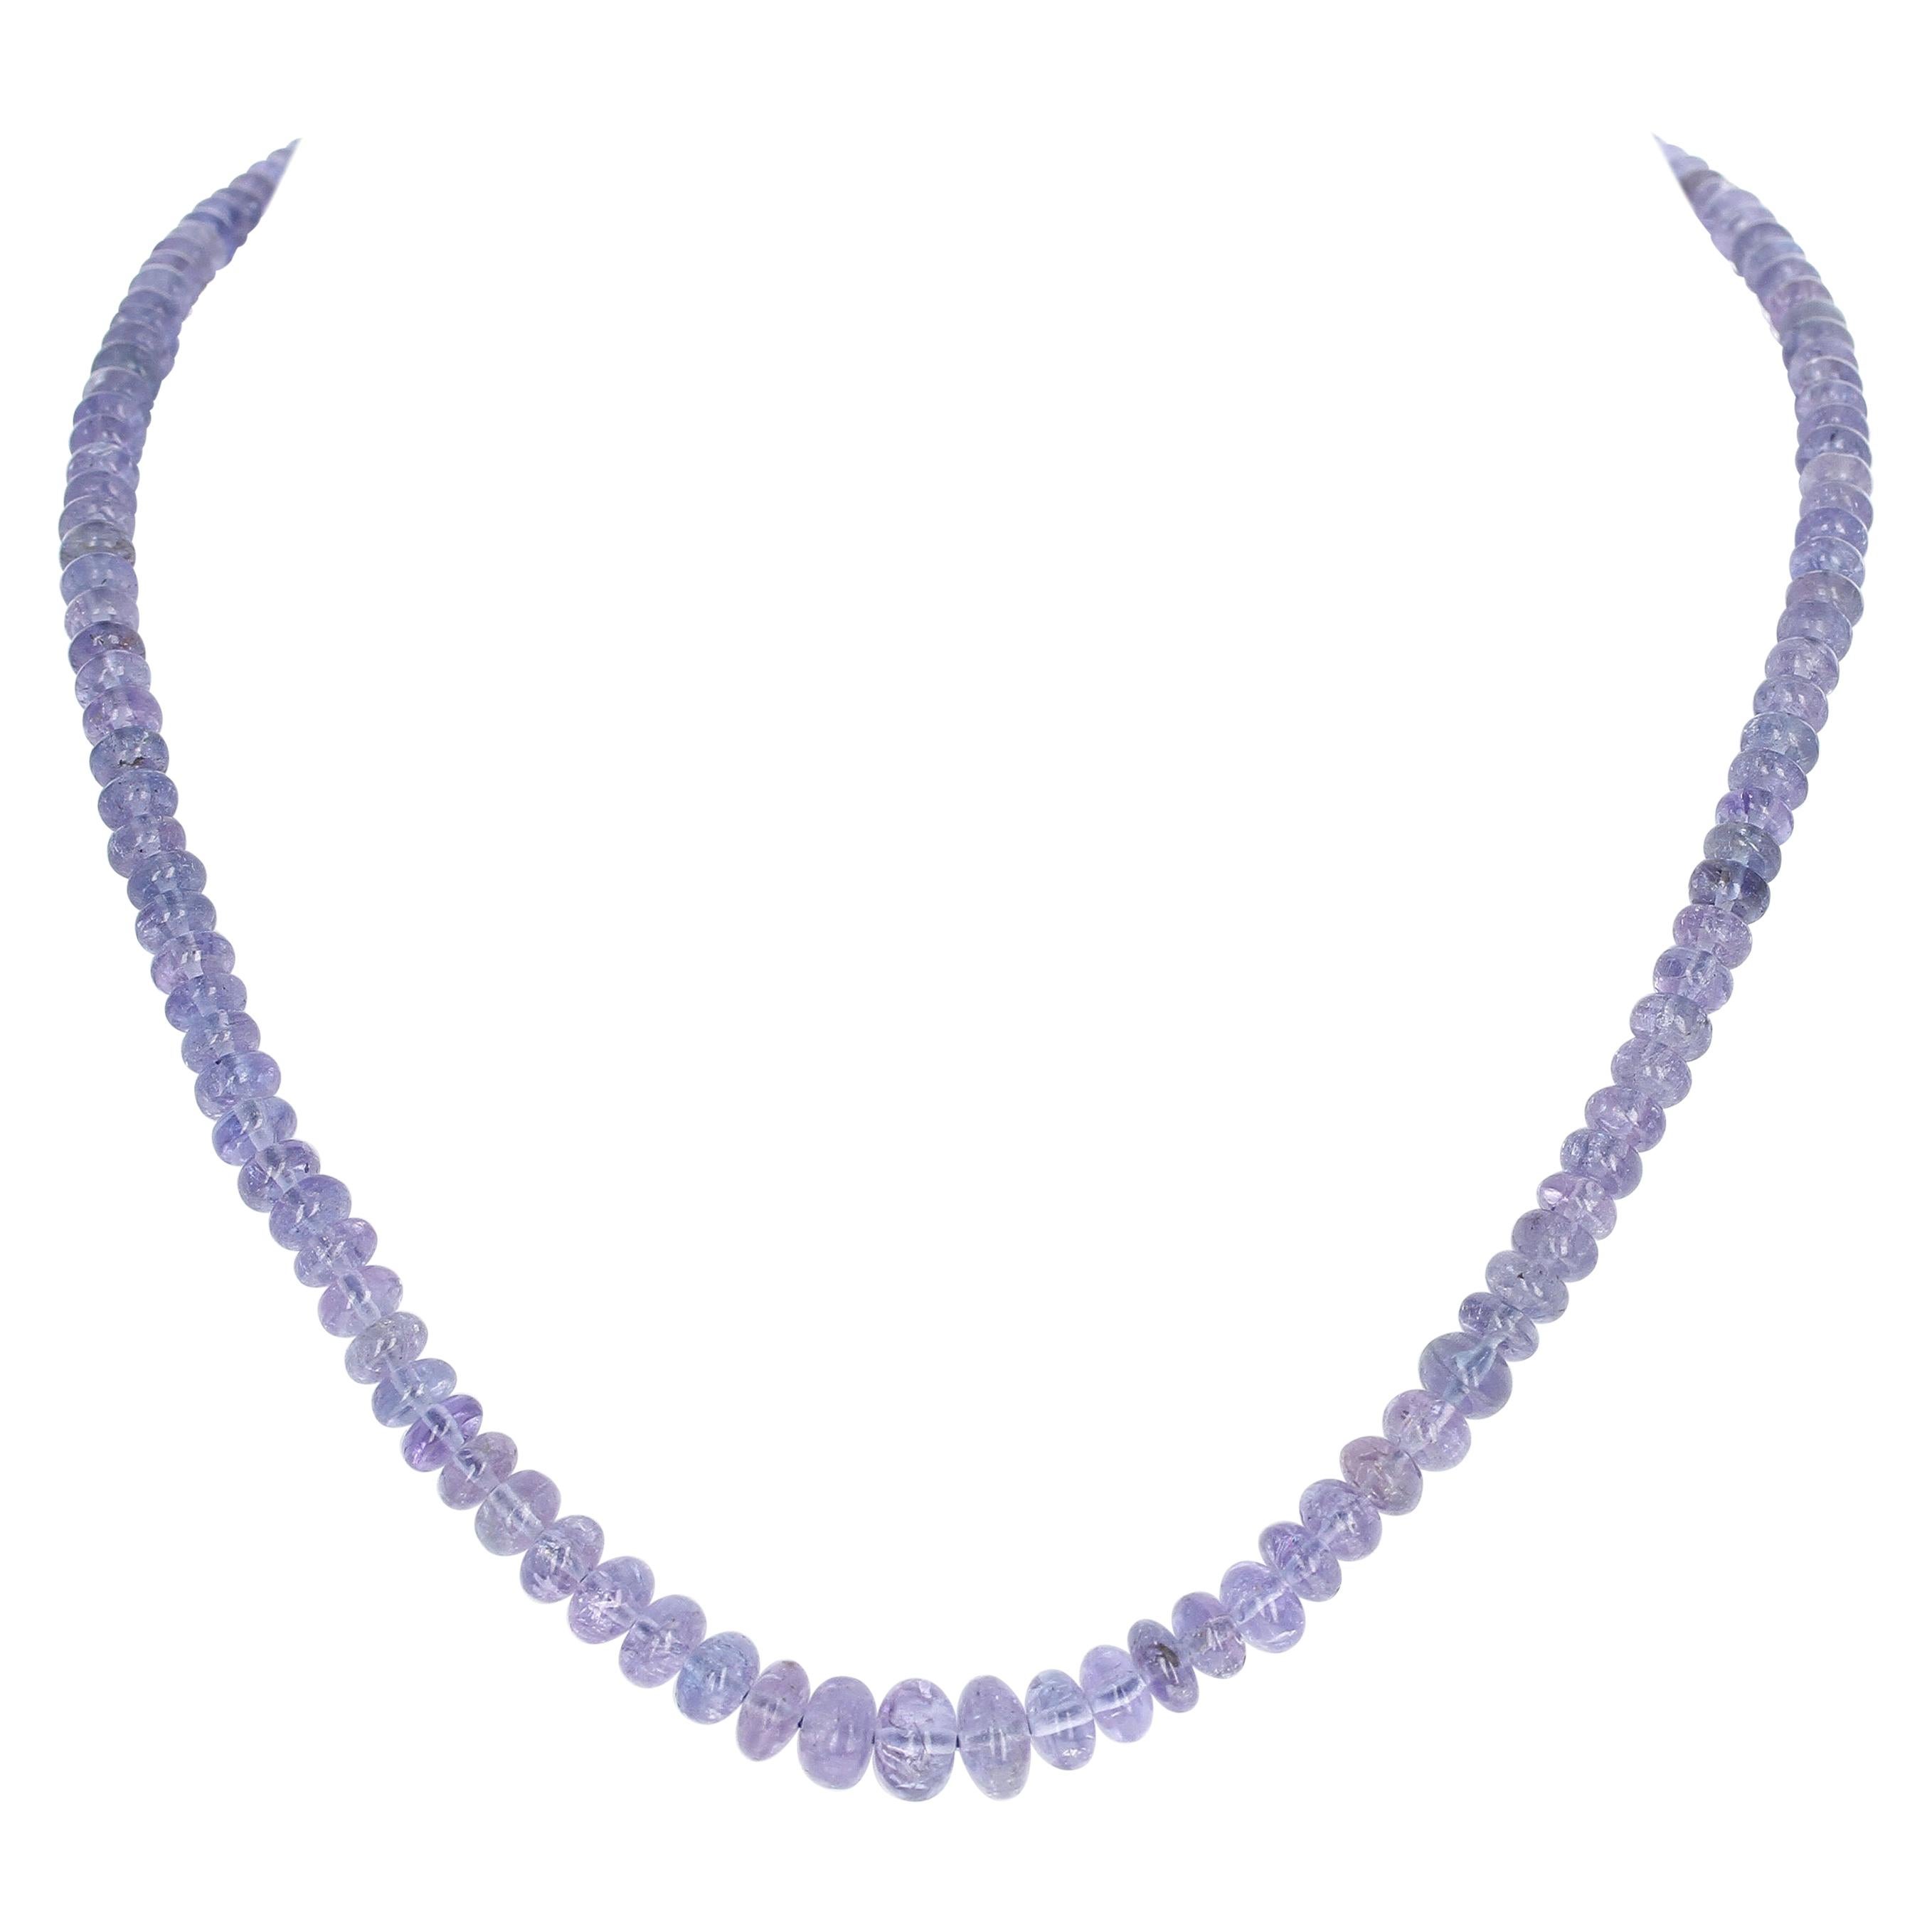 Genuine Tanzanite Smooth Beads Necklace, Toggle Clasp